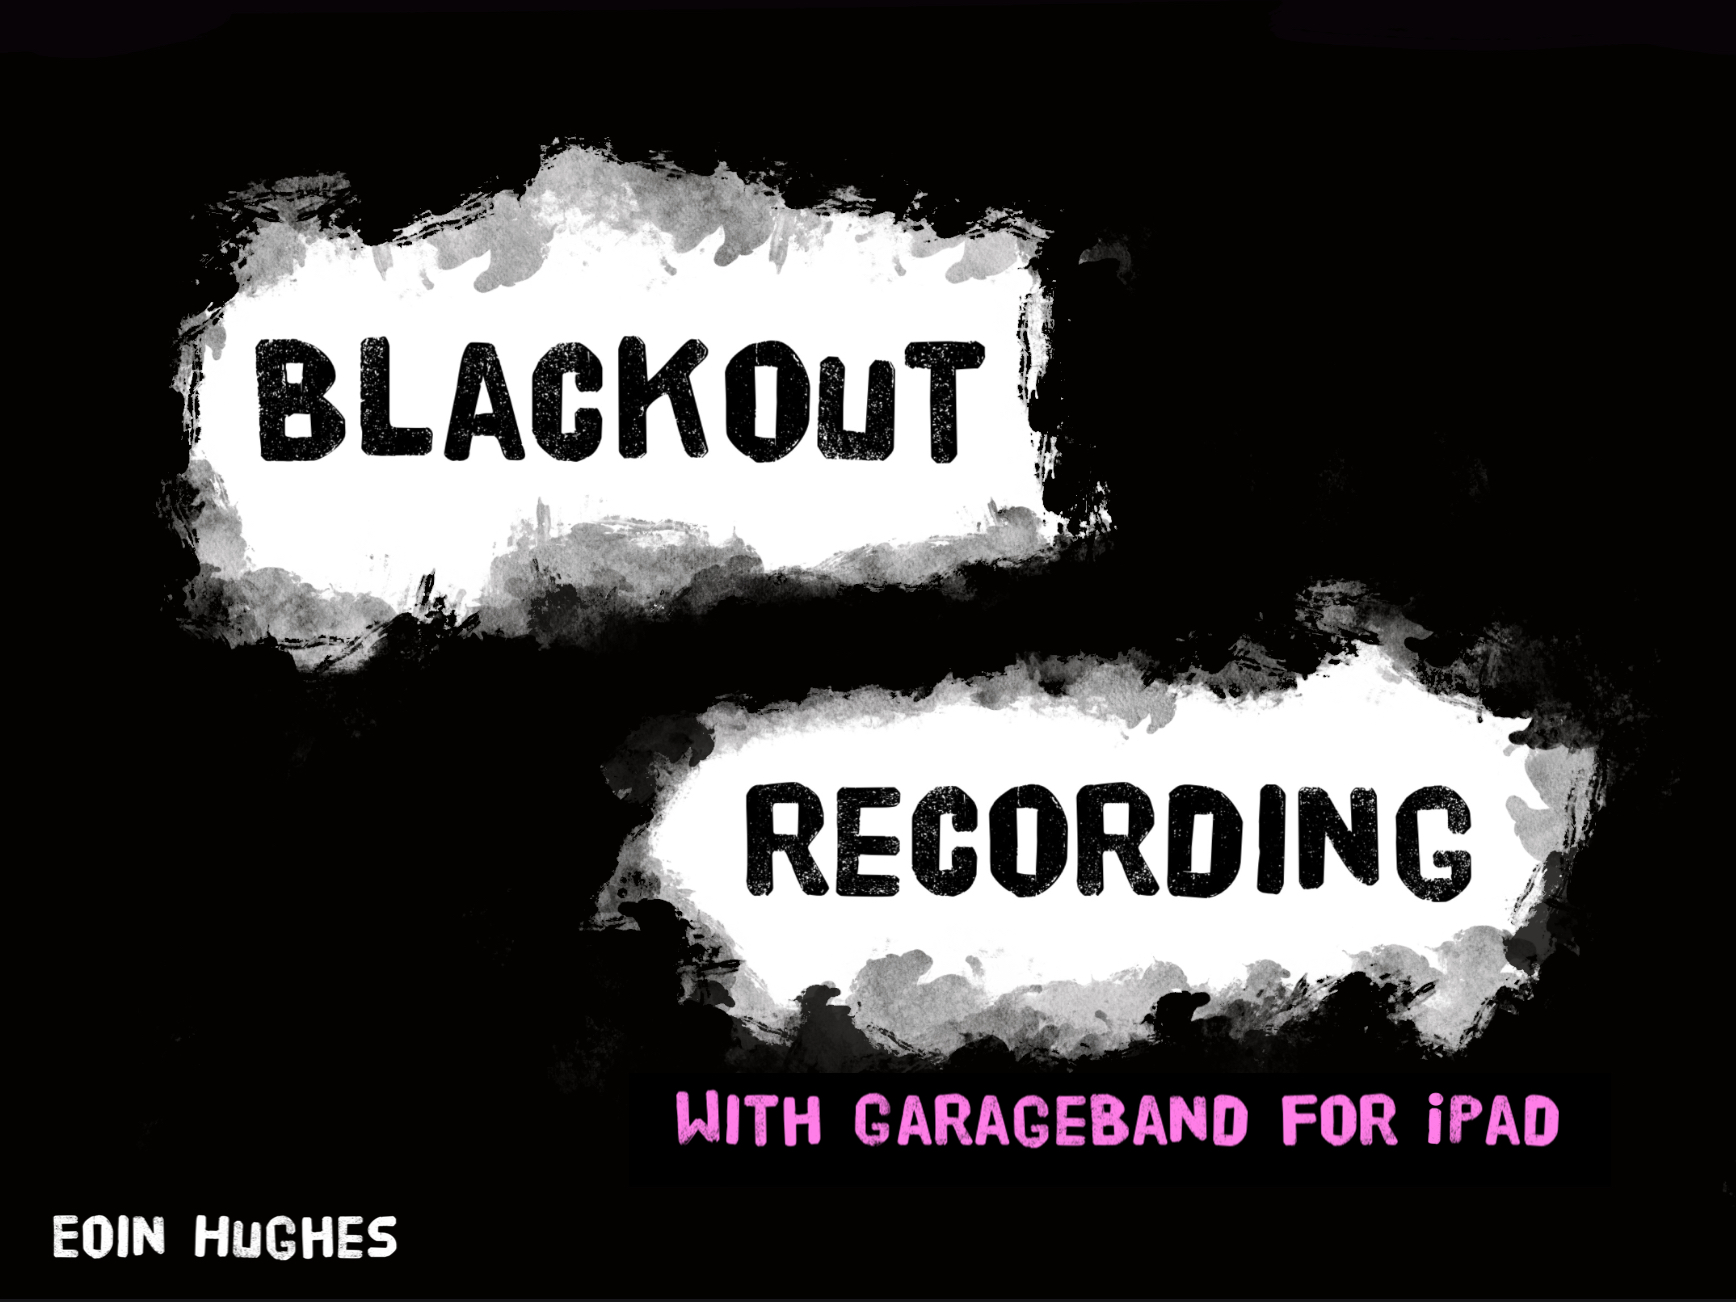 Blackout Recording with GarageBand for iPad — Book Cover